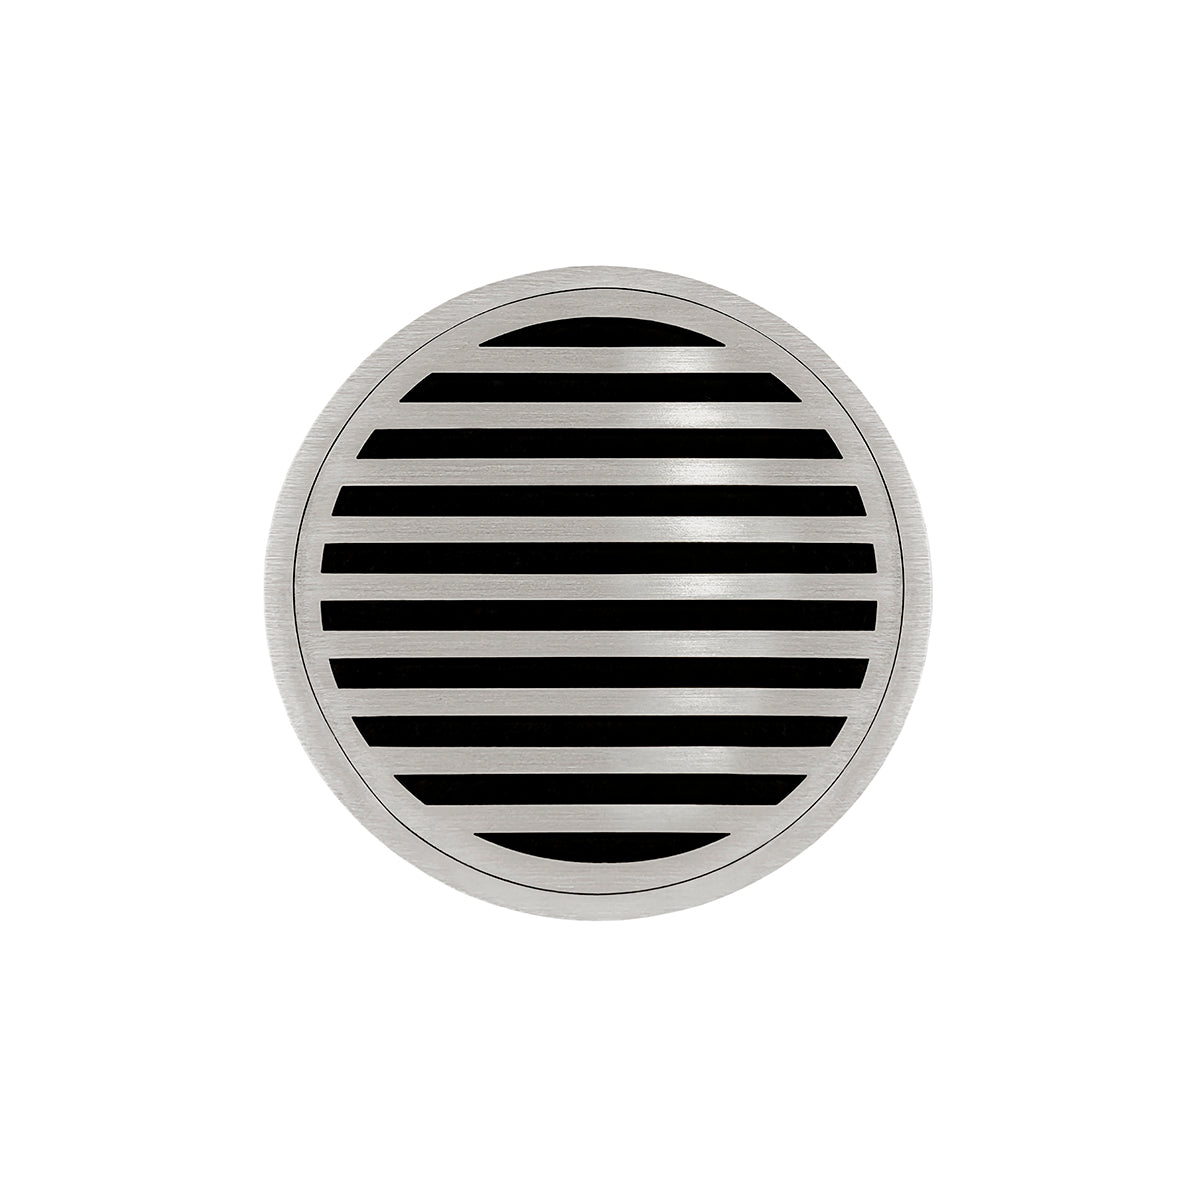 Infinity Drain 5" Round RNDB 5 Premium Center Drain Kit with Lines Pattern Decorative Plate with Stainless Steel Bonded Flange Drain Body, 2" No Hub Outlet